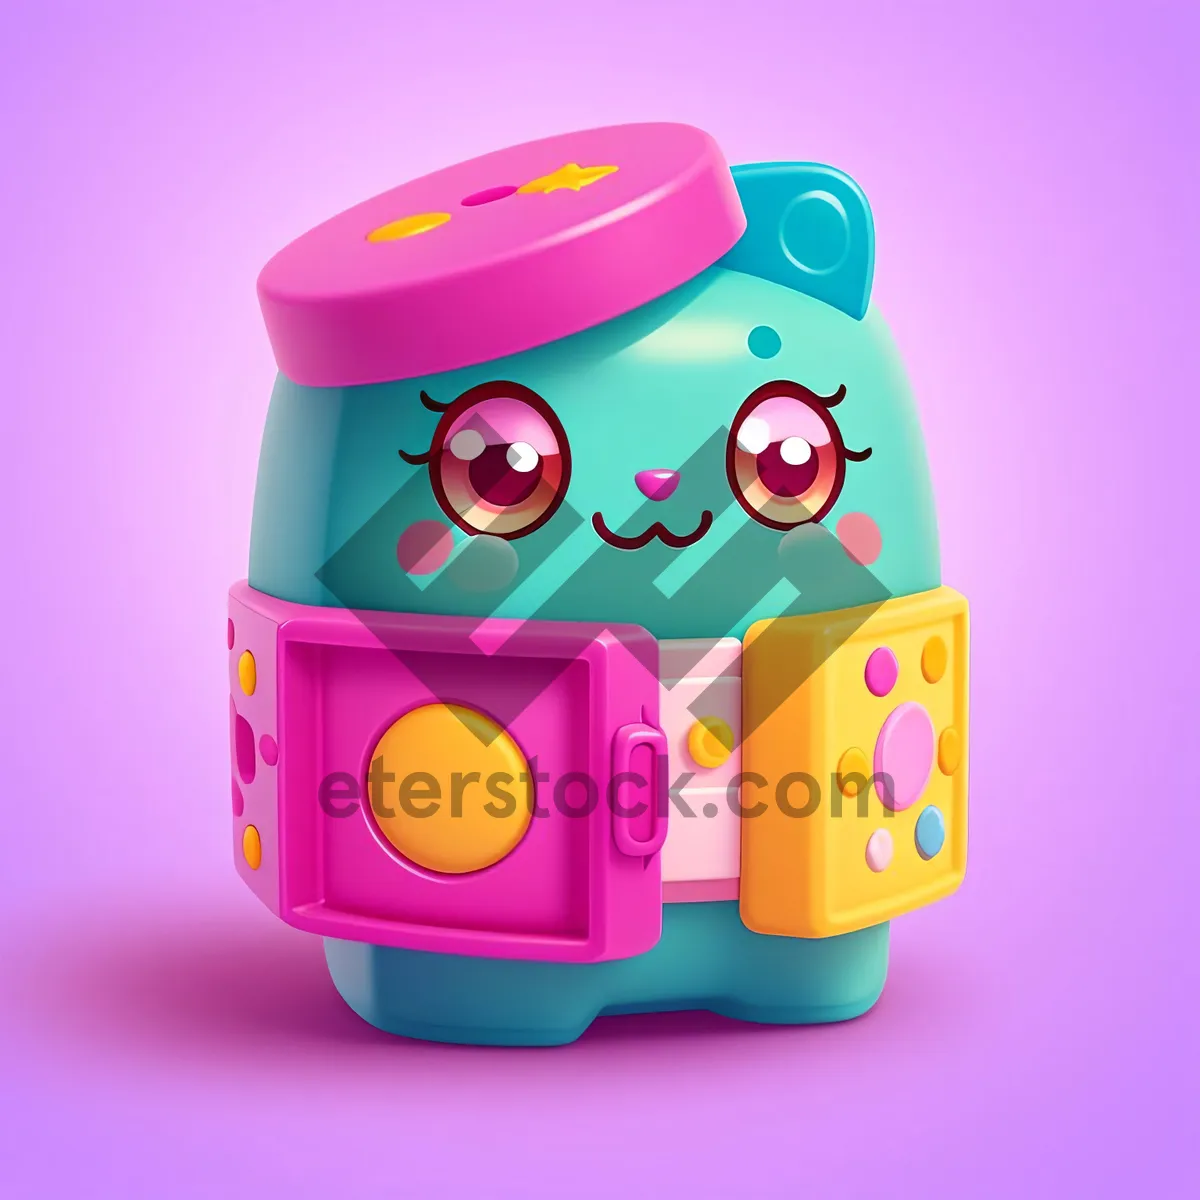 Picture of Jelly Cartoon Plaything - Fun Toy Image